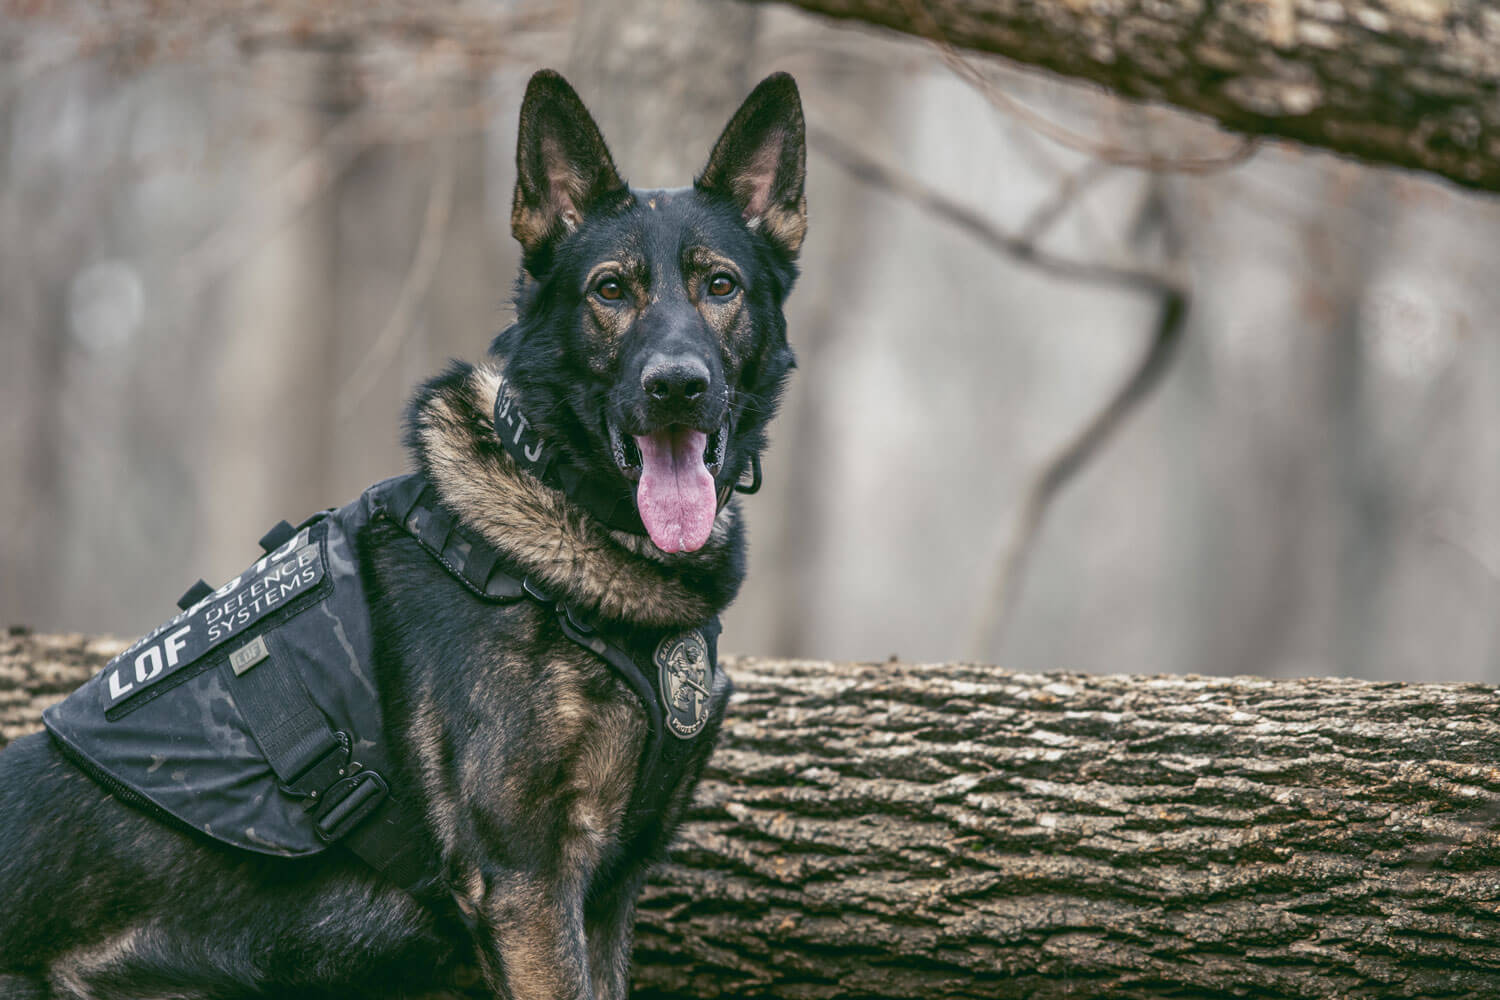 Campaign launched to buy bulletproof vest for Chilton County K-9 wounded in  shootout - al.com